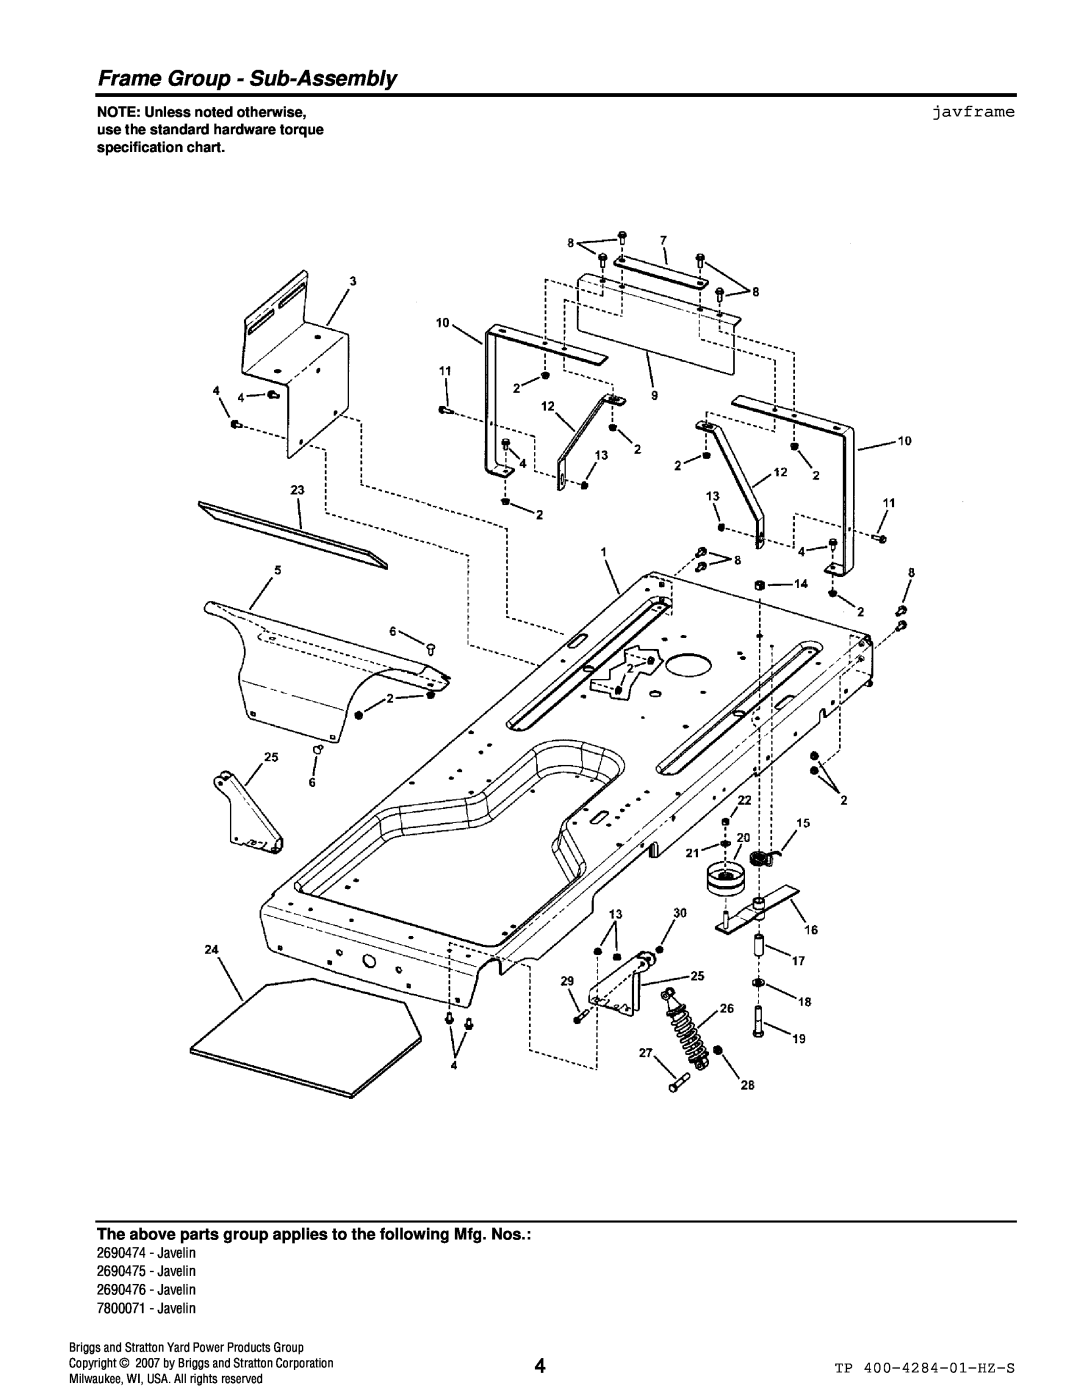 Simplicity TP 400-4284-01-HZ-S Frame Group - Sub-Assembly, javframe, NOTE: Unless noted otherwise, specification chart 